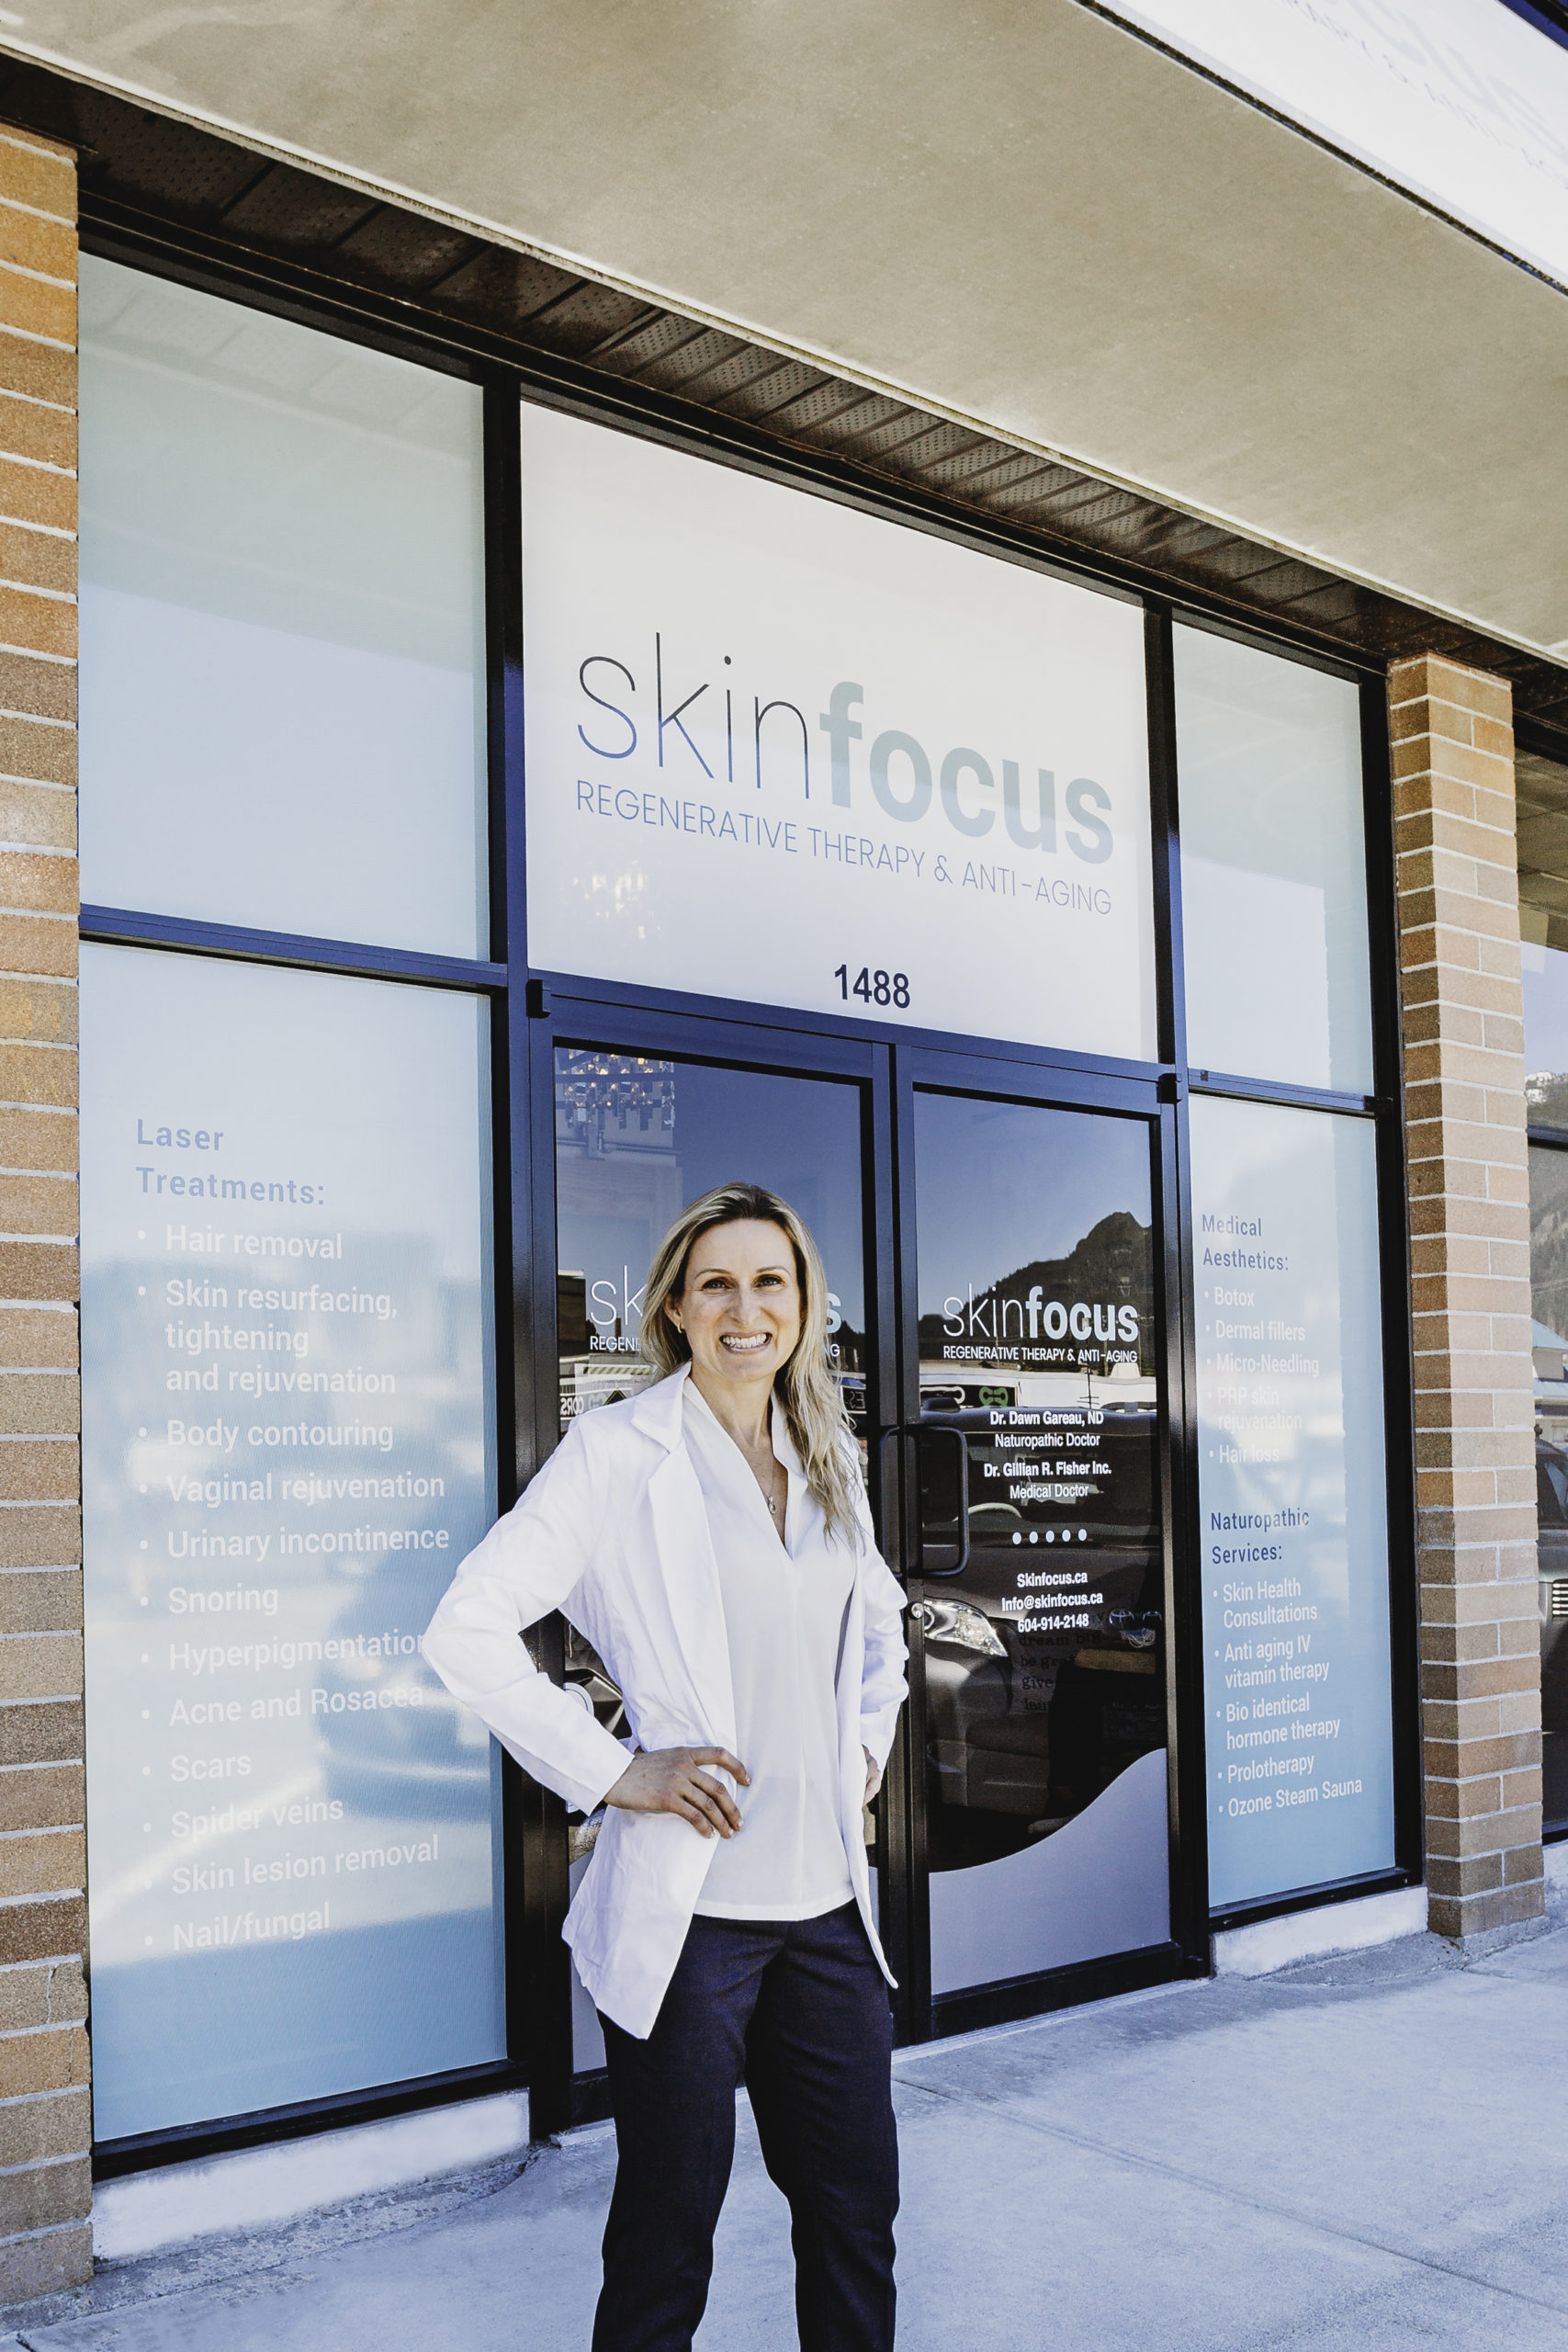 https://www.downtownsquamish.com/wp-content/uploads/2021/06/skin-focus-scaled.jpg